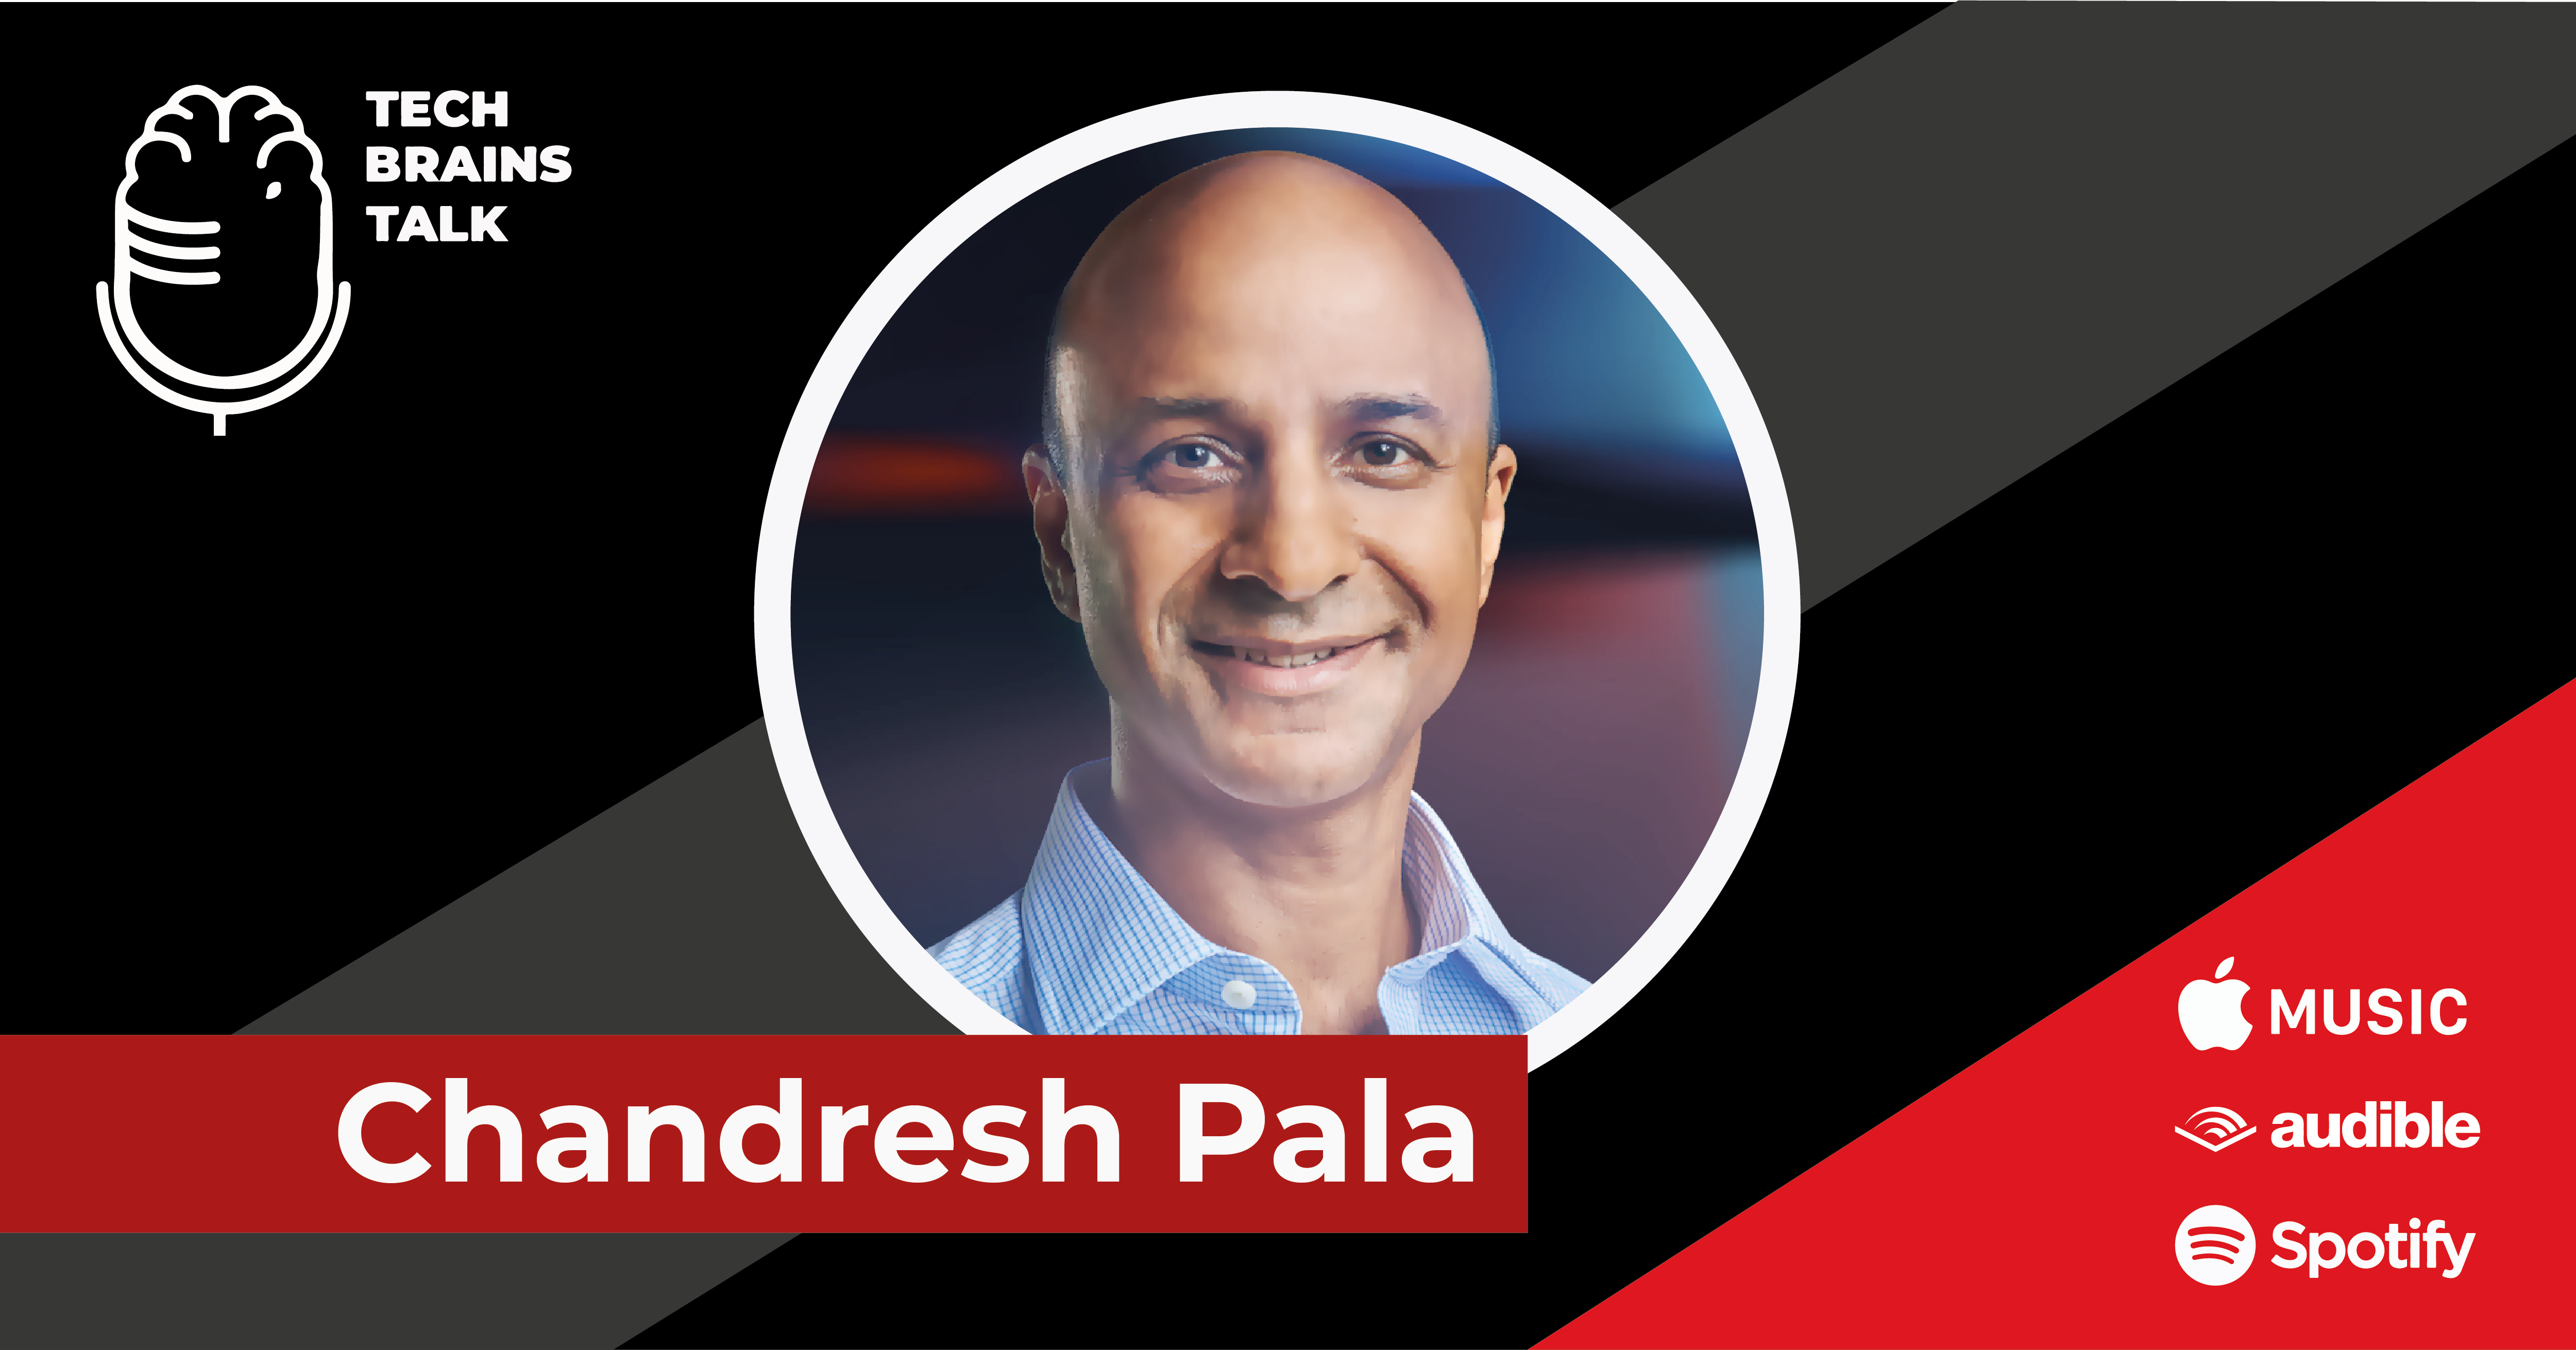 Learn all about building exponential organisations from Chandresh Pala on TechBrainsTalk, a tech podcast